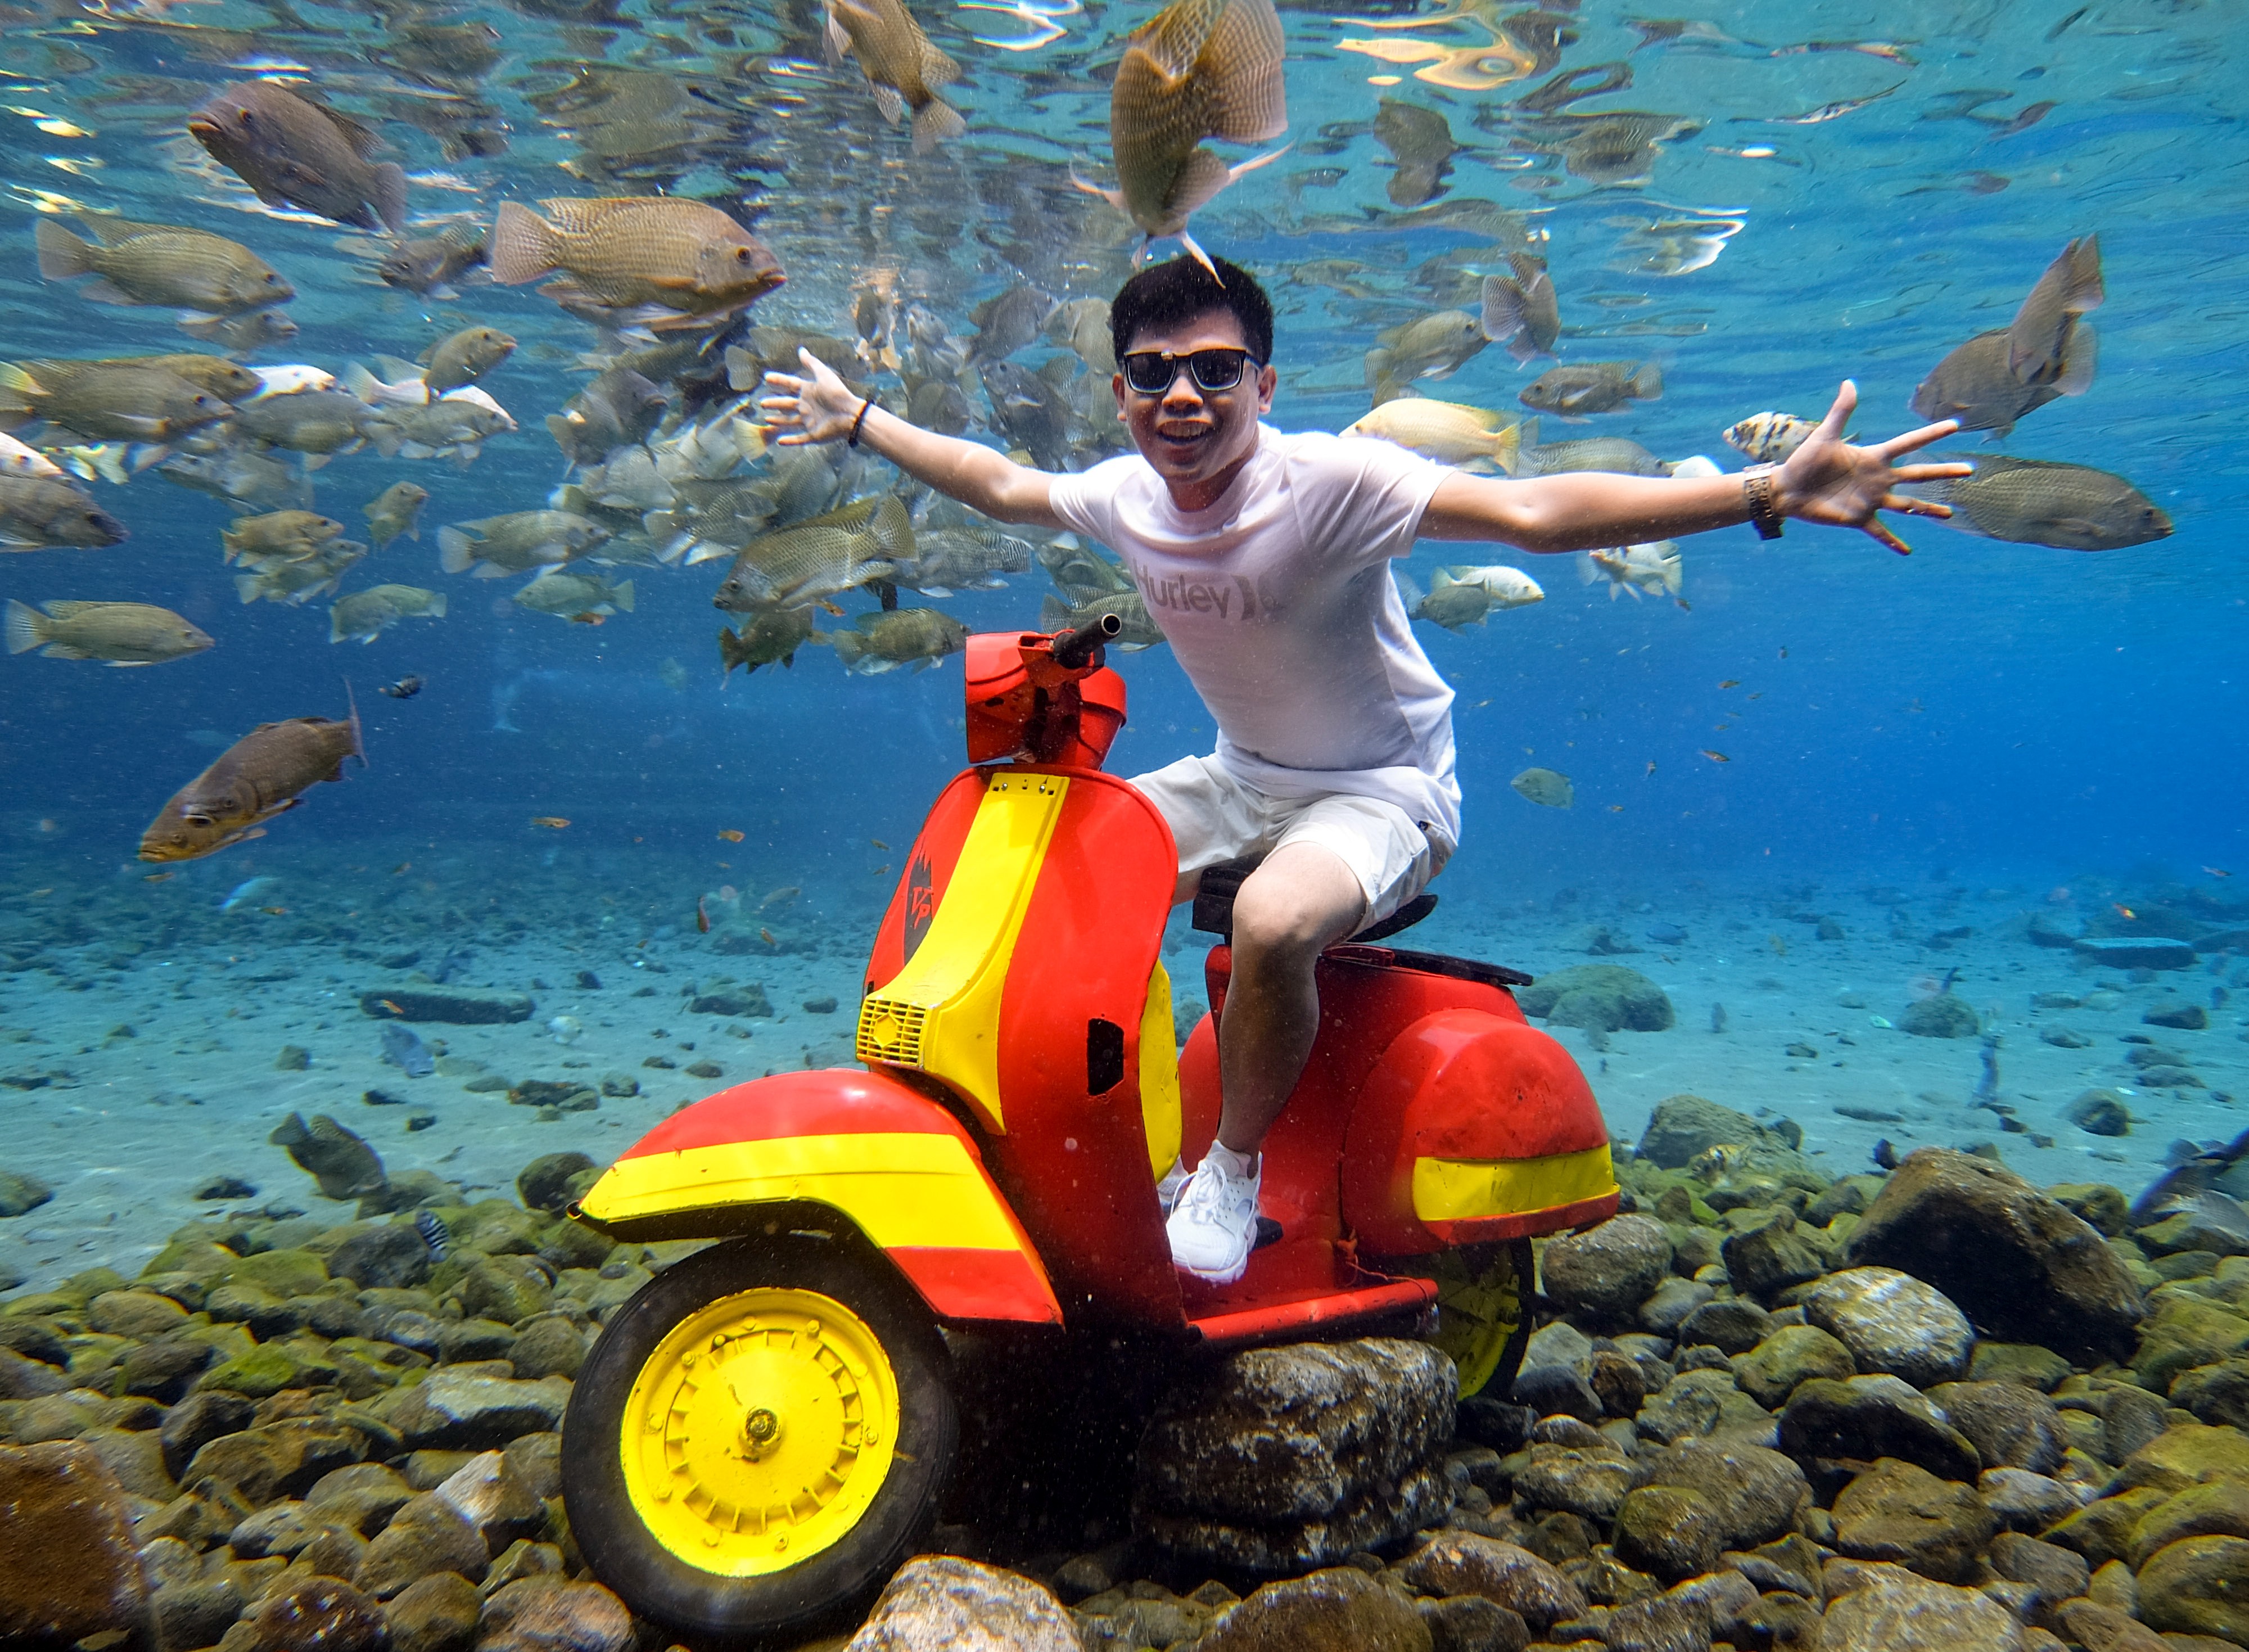 A strategically placed motorcycle is perfect for underwater poses at Umbul Ponggok, Indonesia. Photo: James Wendlinger